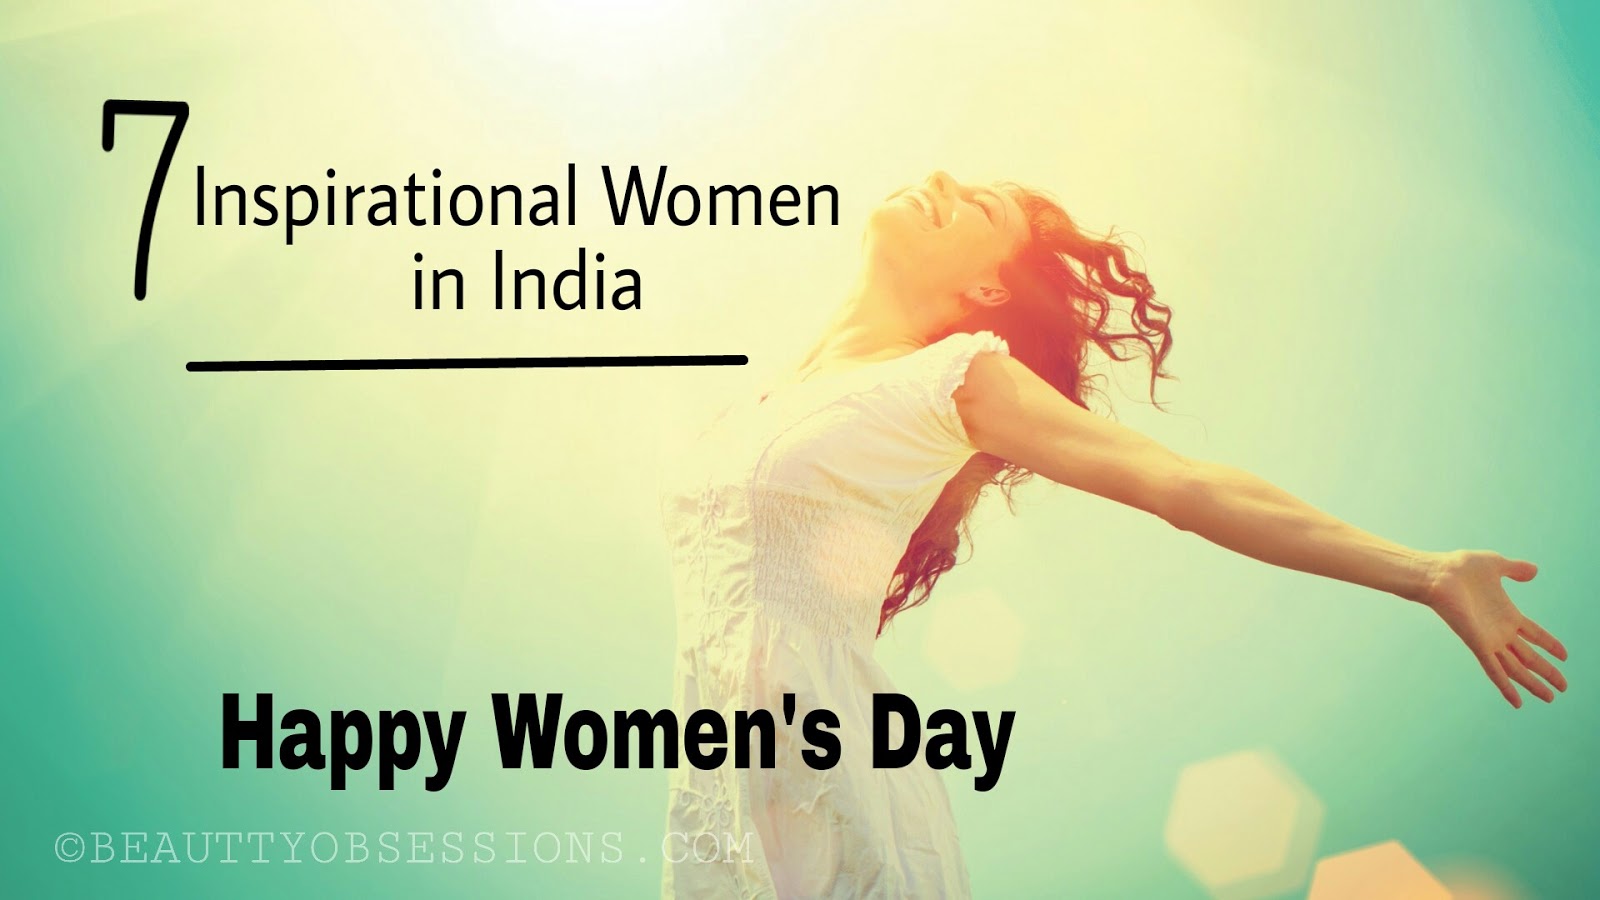 A post dedicated to 7 Inspirational Women of India - Happy Women's Day